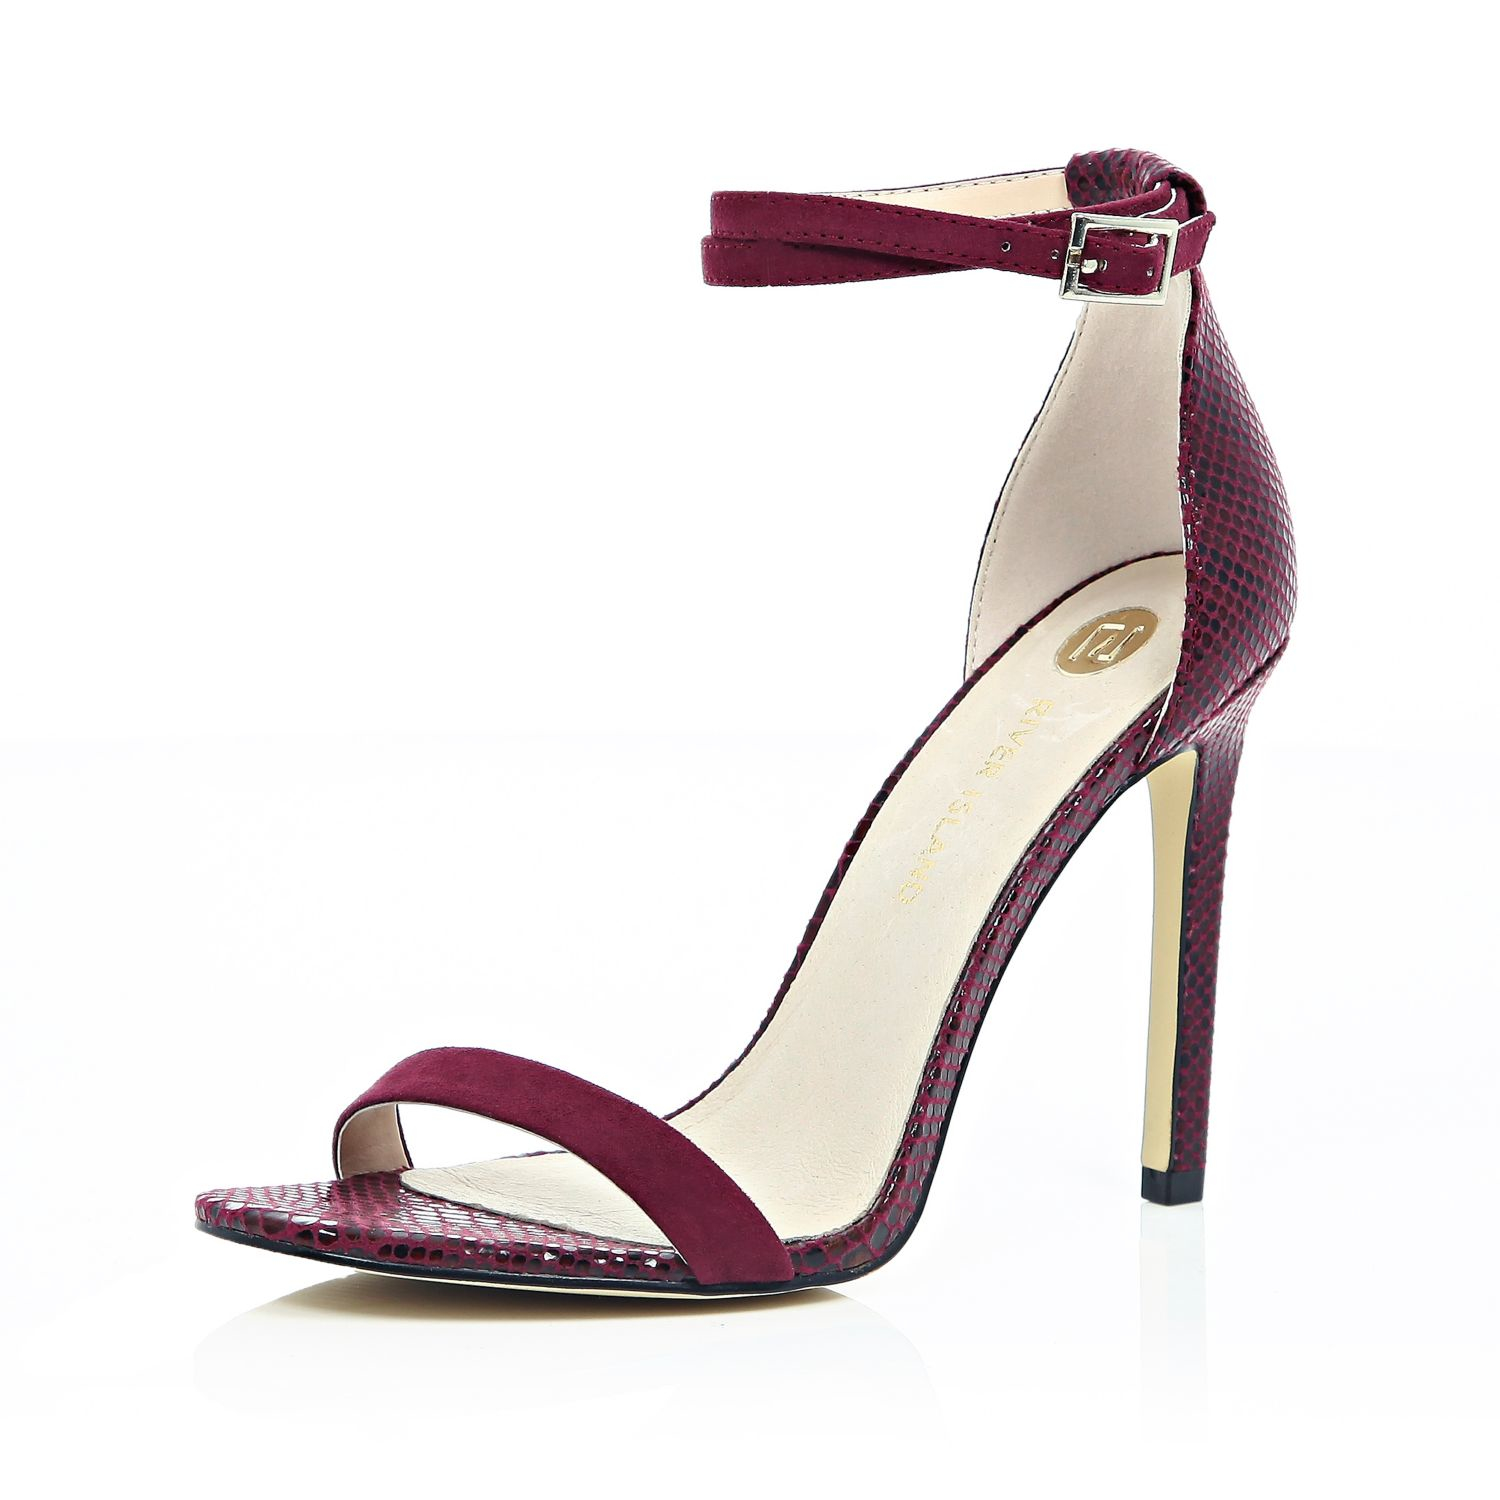 River Island Dark Red Barely There Sandal Heels in Red | Lyst